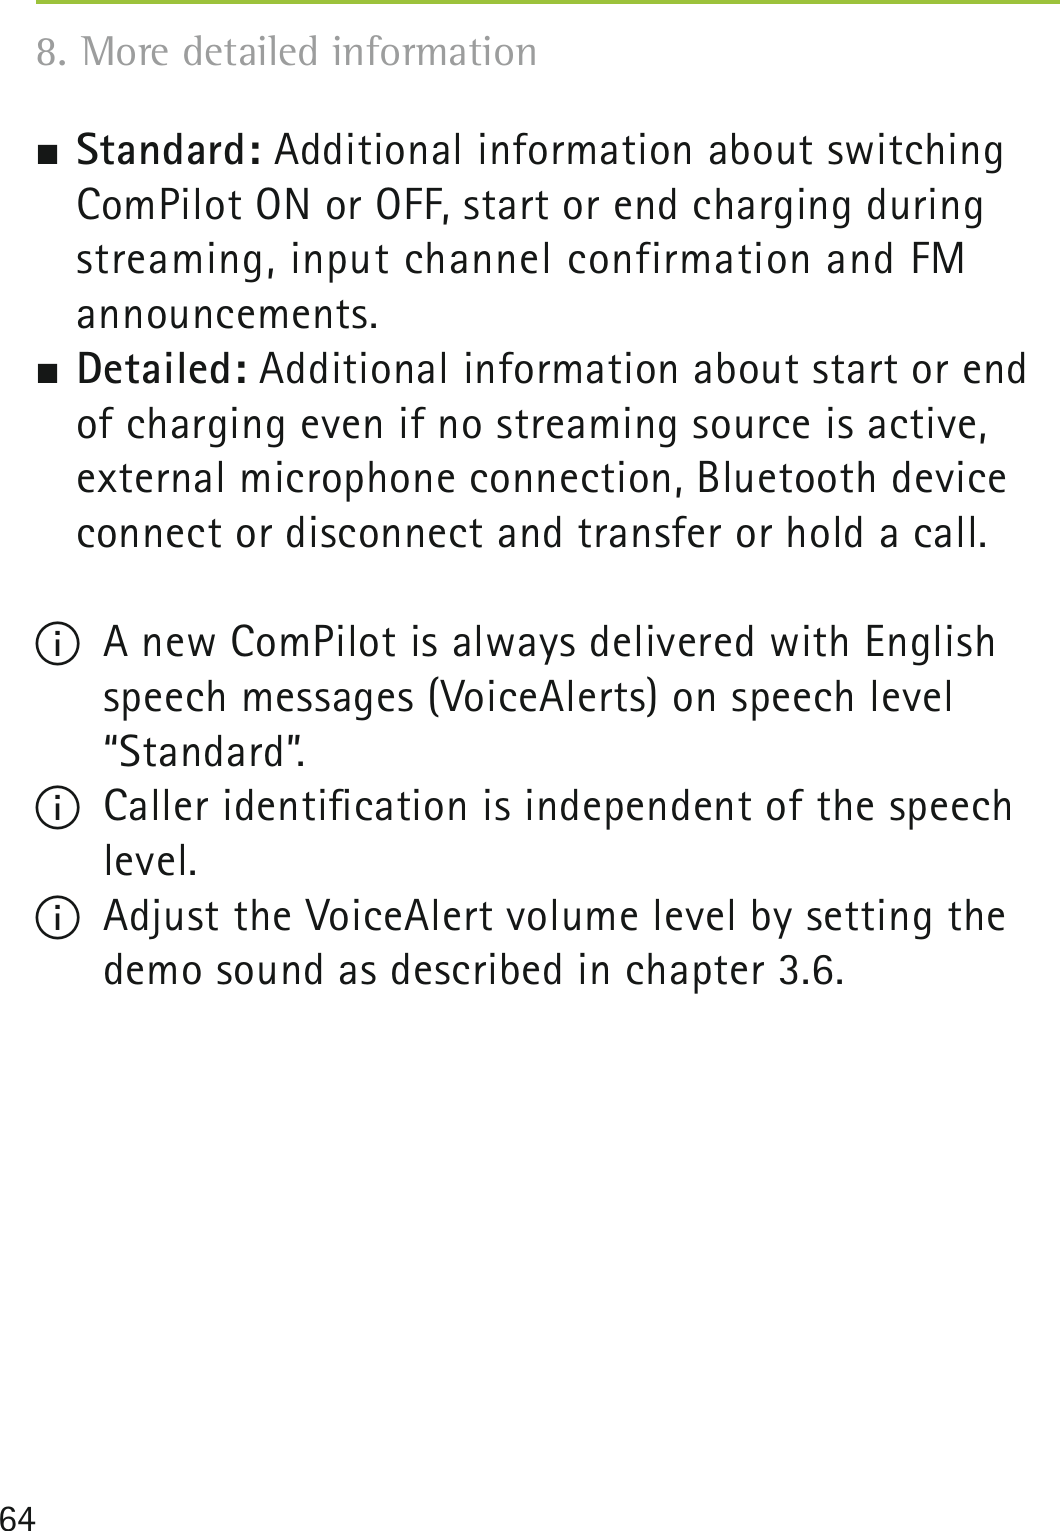 64 Standard: Additional information about switching ComPilot ON or OFF, start or end charging during streaming, input channel confirmation and FM  announcements. Detailed: Additional information about start or end of charging even if no streaming source is active, external microphone connection, Bluetooth device connect or disconnect and transfer or hold a call.I  A new ComPilot is always delivered with English  speech messages (VoiceAlerts) on speech level “Standard”.I  Caller identiﬁcation is independent of the speech  level.I  Adjust the VoiceAlert volume level by setting the demo sound as described in chapter 3.6. 8. More detailed information 